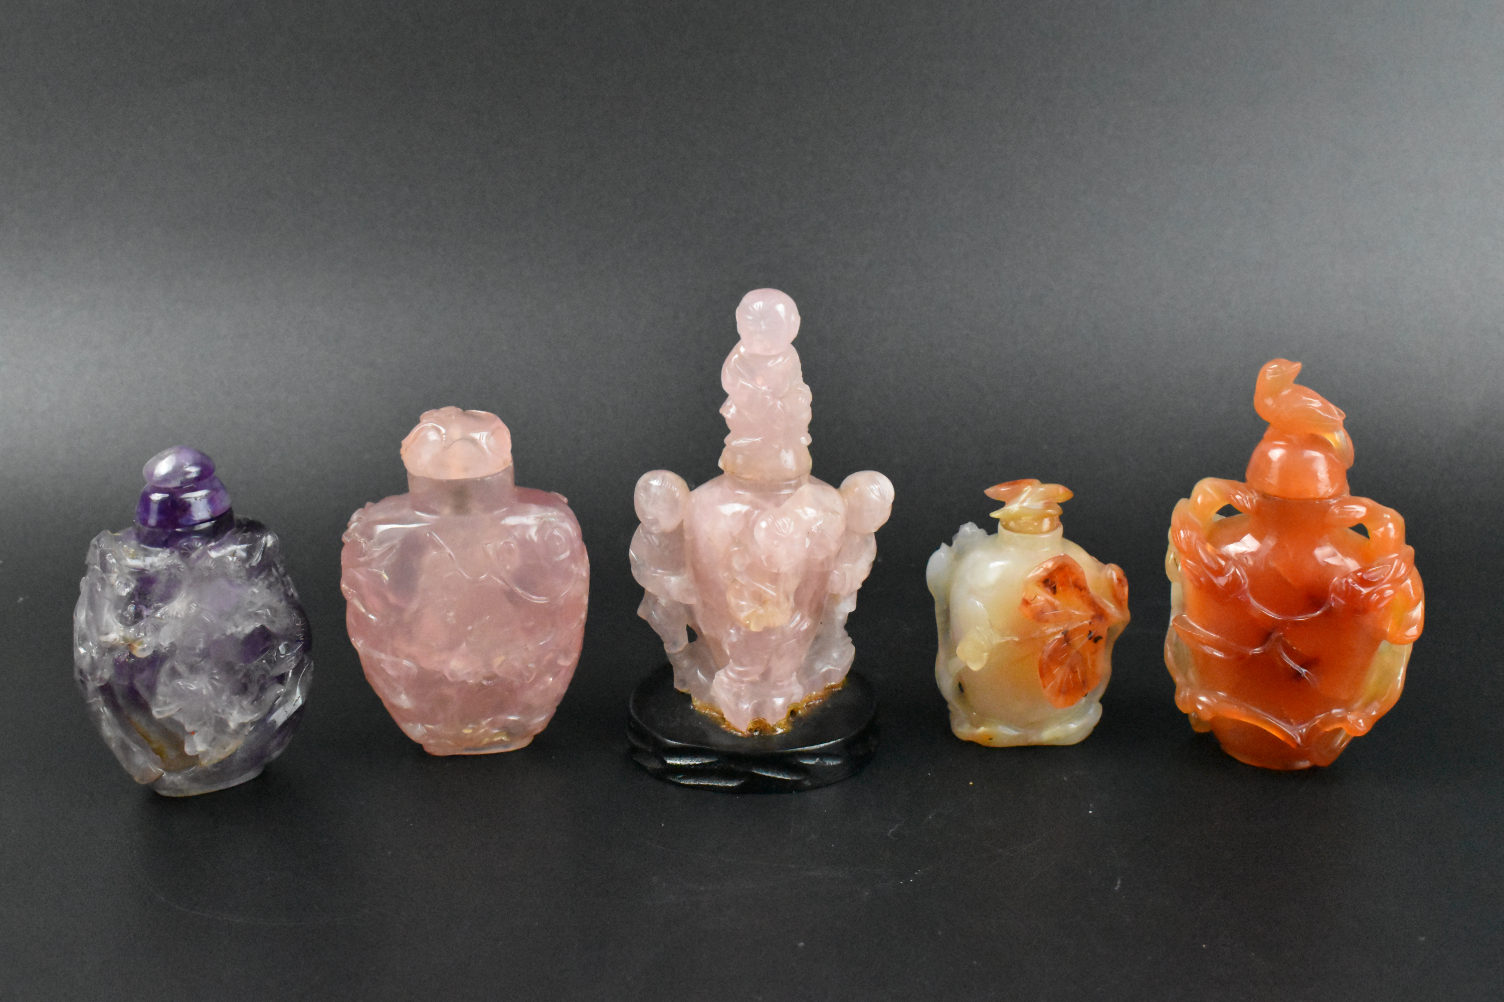 5 CHINESE SNUFF BOTTLES ROSE QUARTZ AGATE CRYSTAL 33a6a2